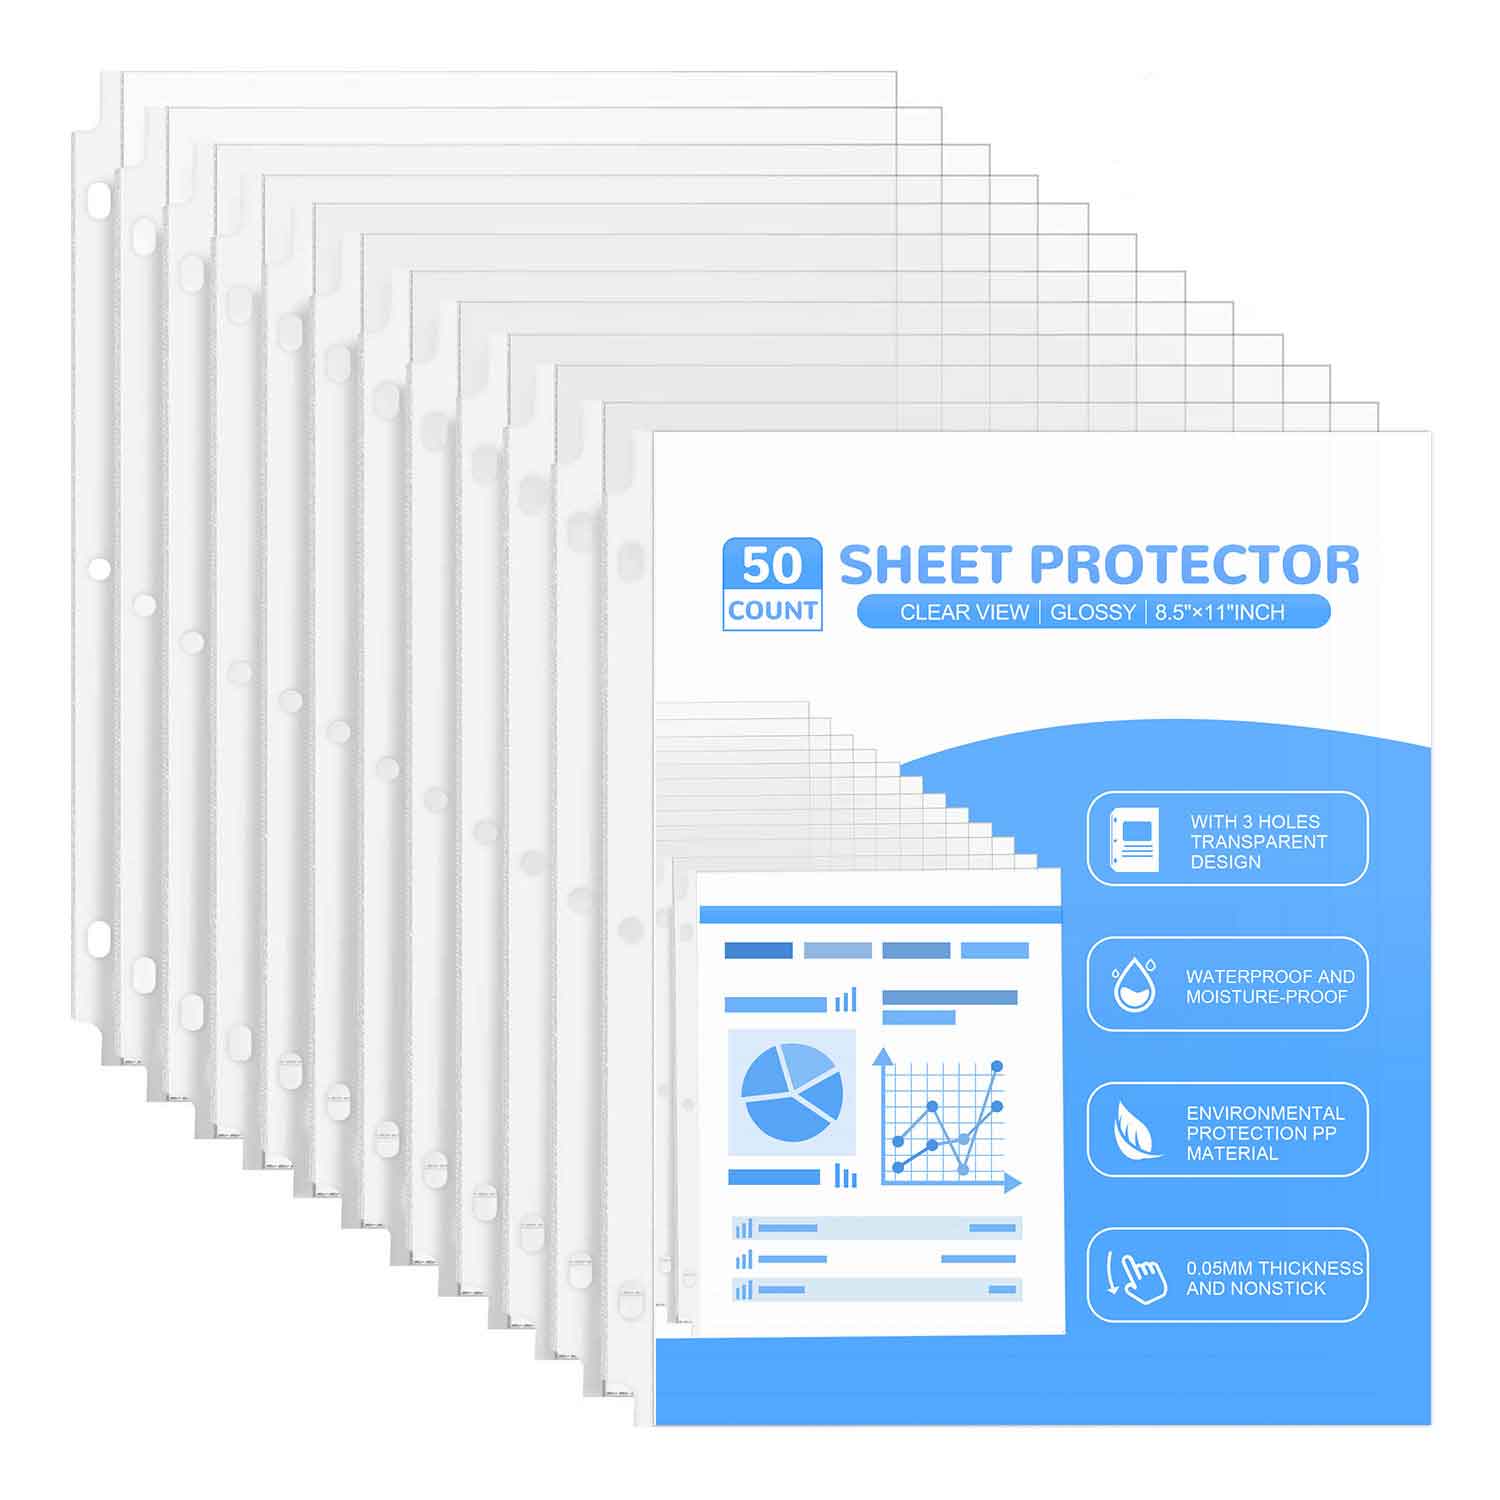 100 Clear Sheet Protectors, 8.5 x 11 Clear Page Protectors for 3 Ring  Binder, Plastic Sheet Sleeves, Top Loading Paper Protector with Reinforced